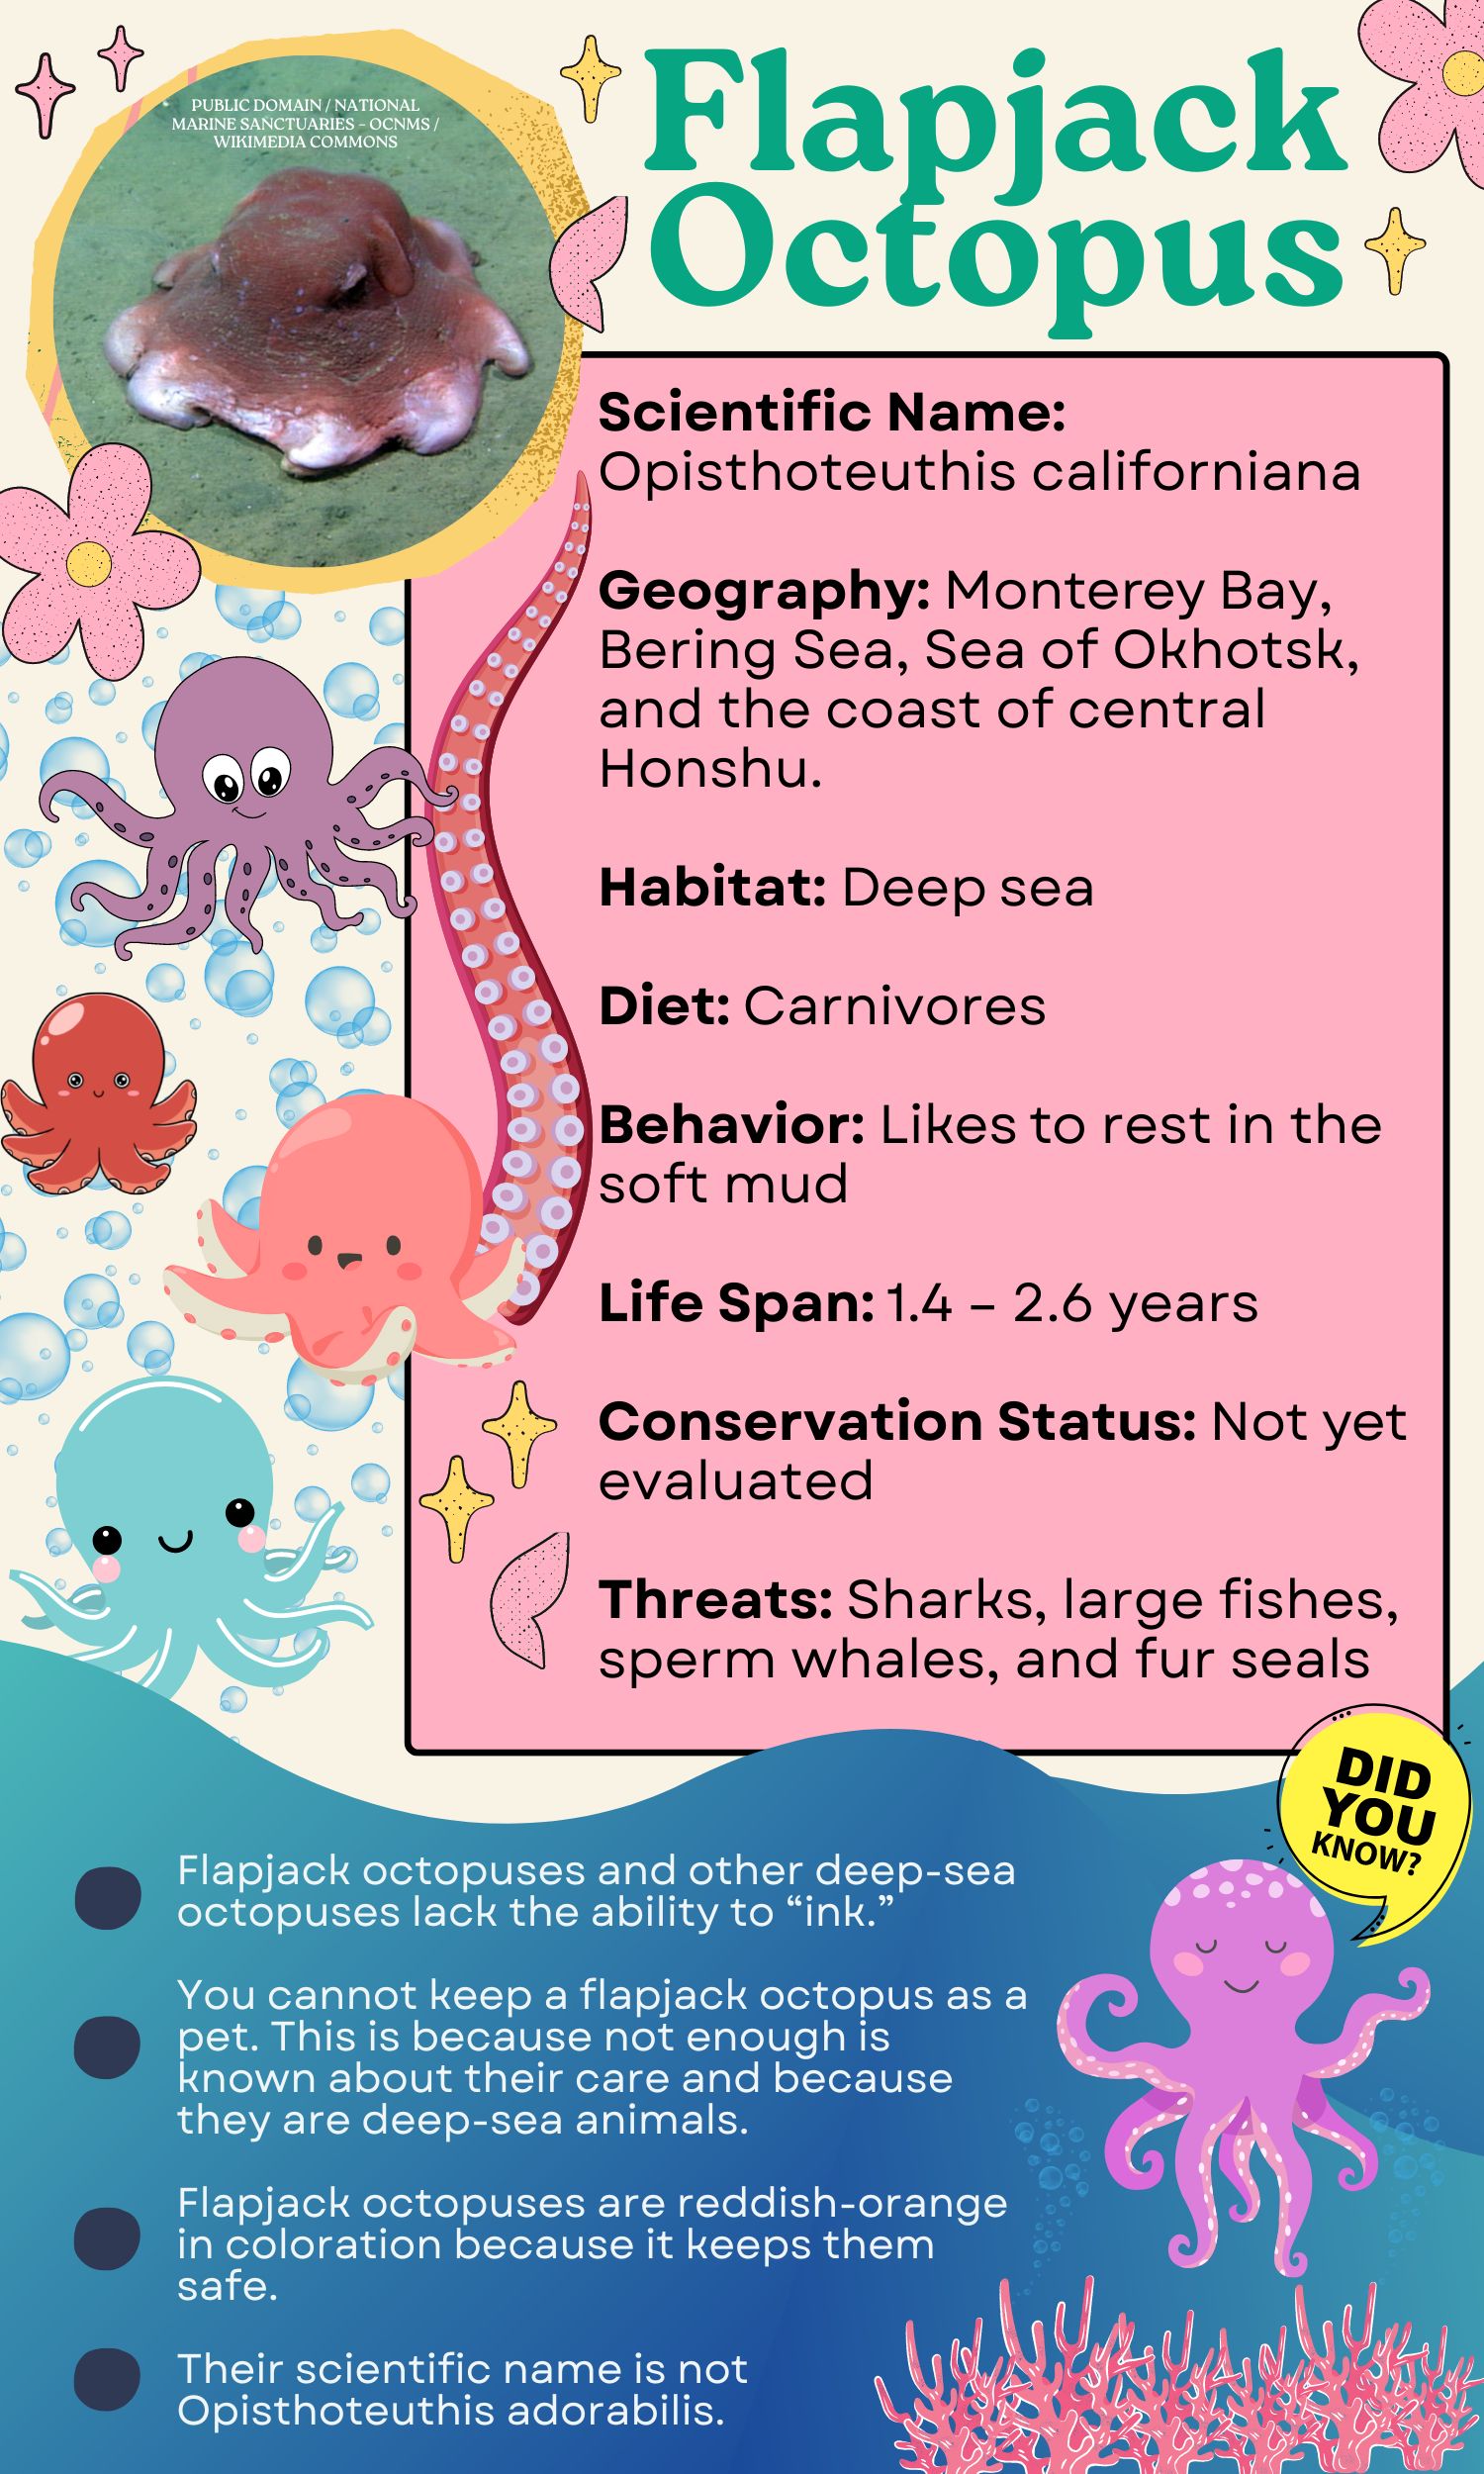 Chart of flapjack octopus complete with facts, picture, and more